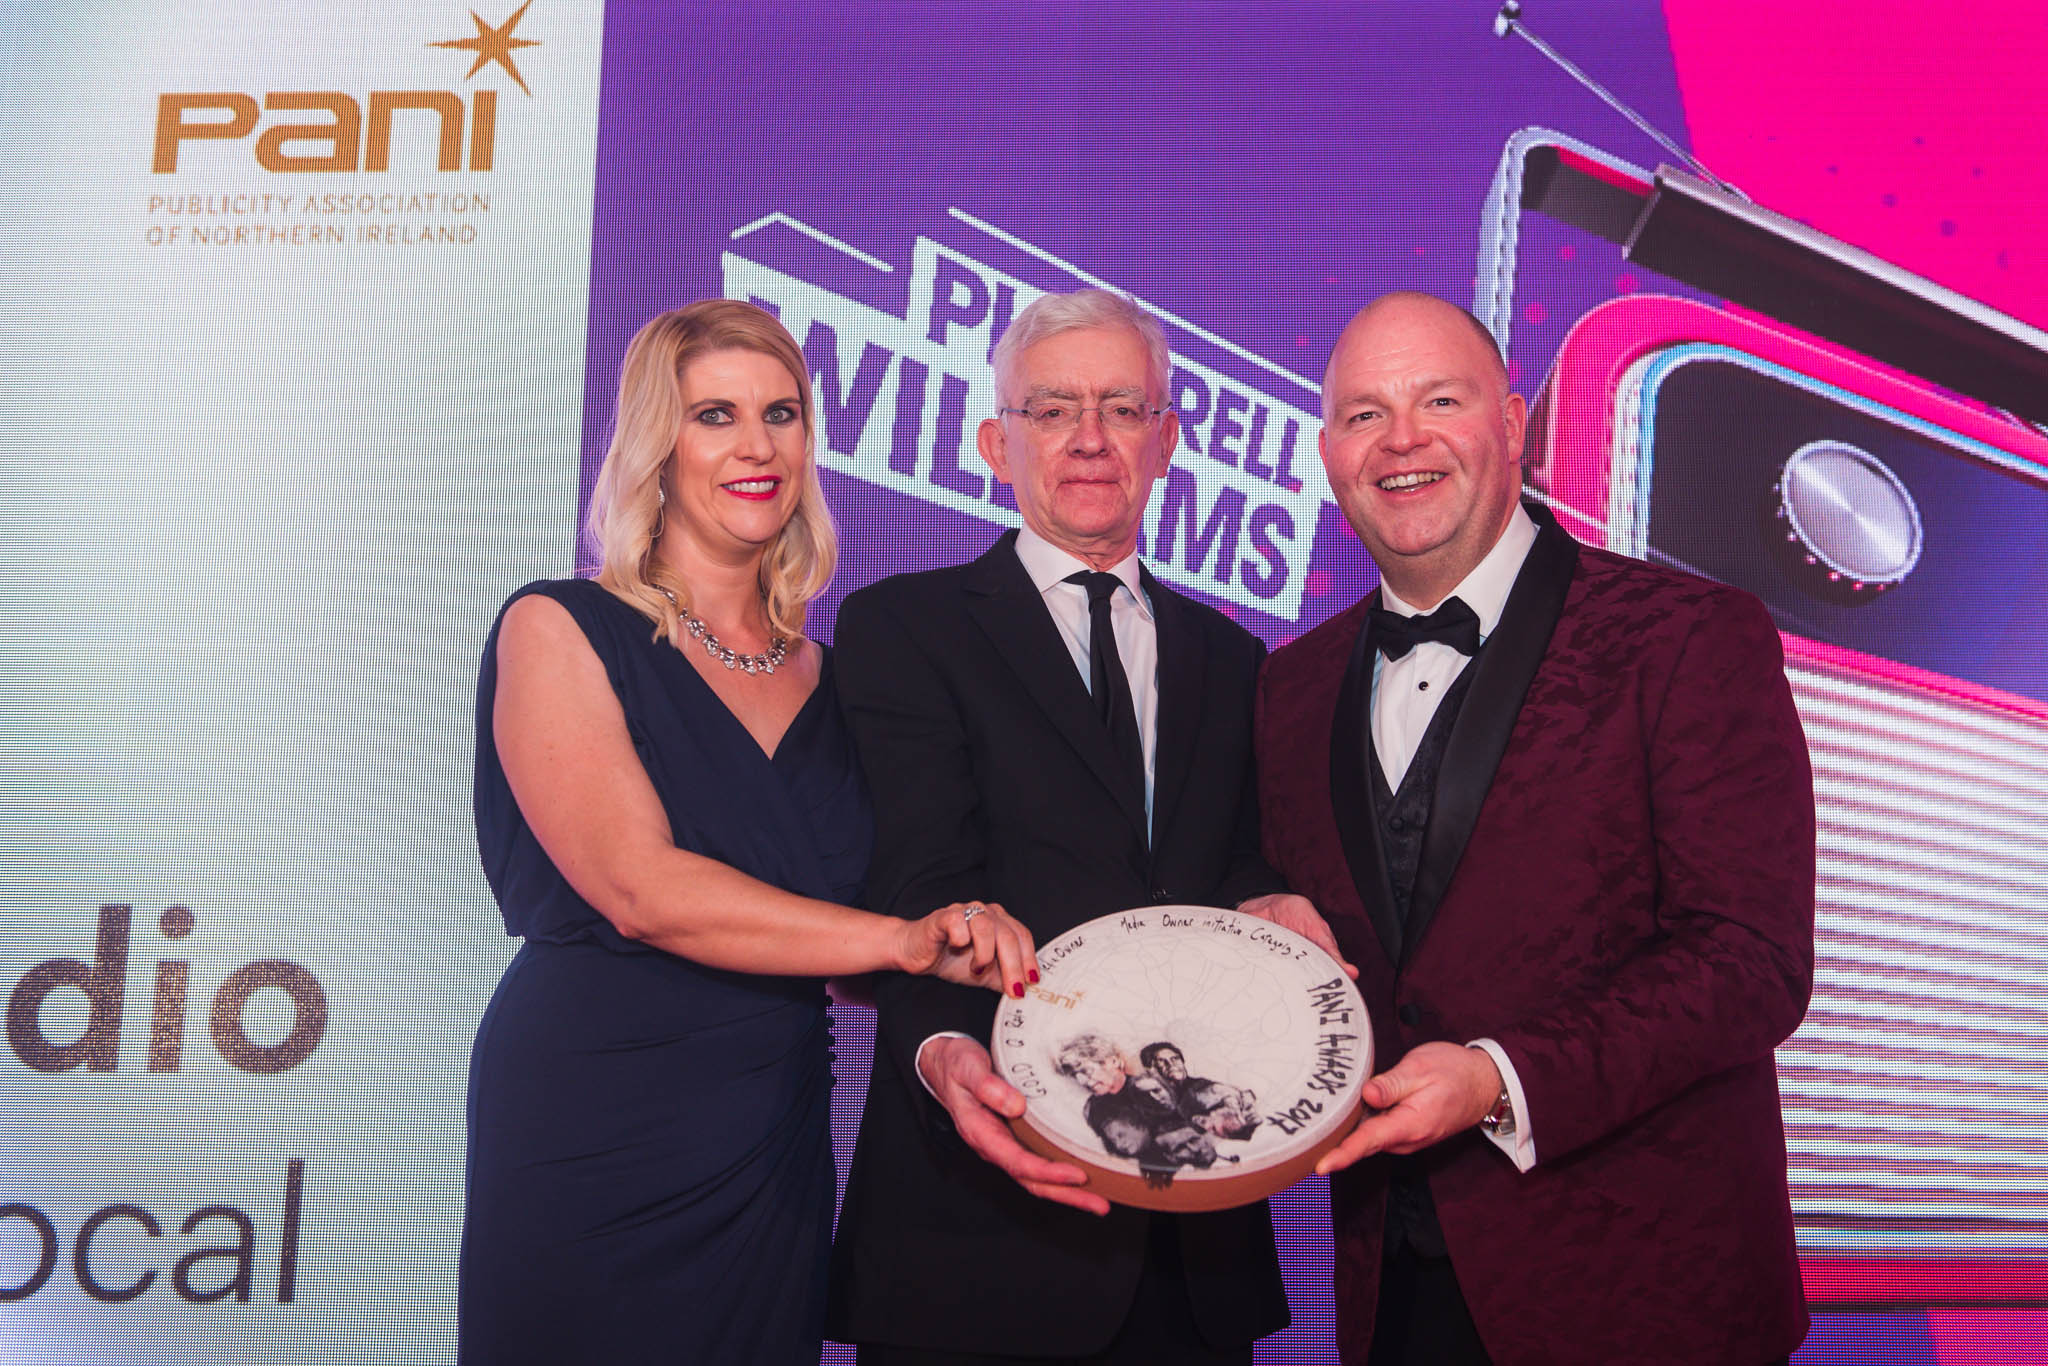 ‘Proud to be local’ Q Radio strikes gold again with a win at the PANI Awards